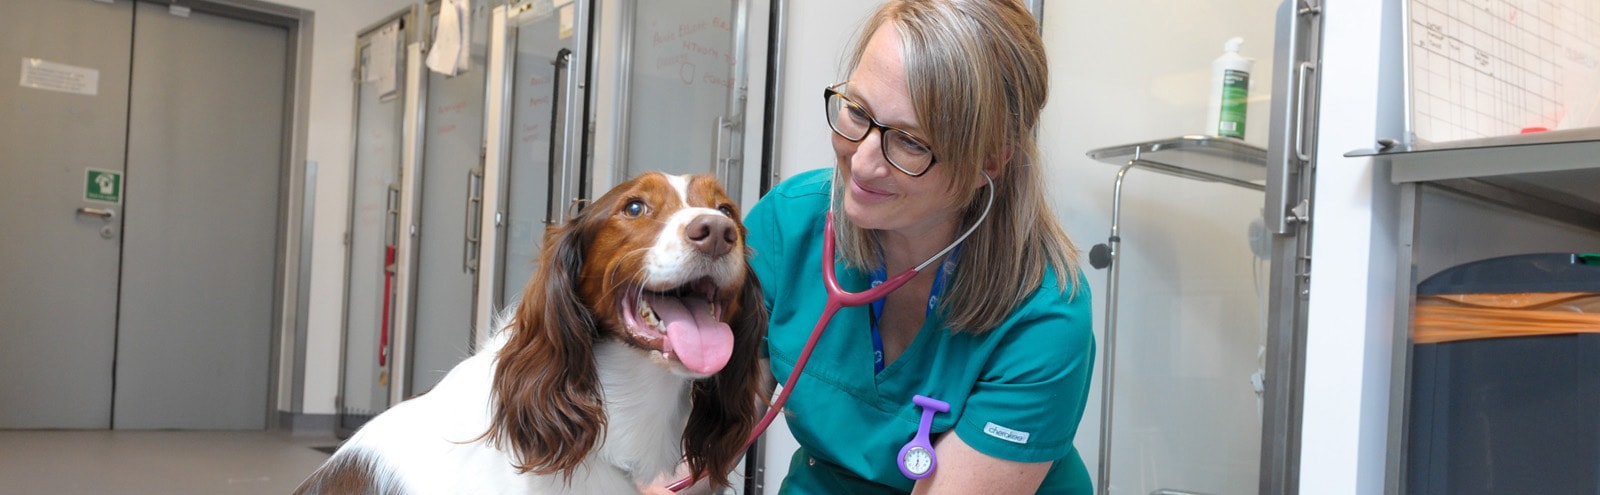 Questions and answers about veterinary hospital pet care